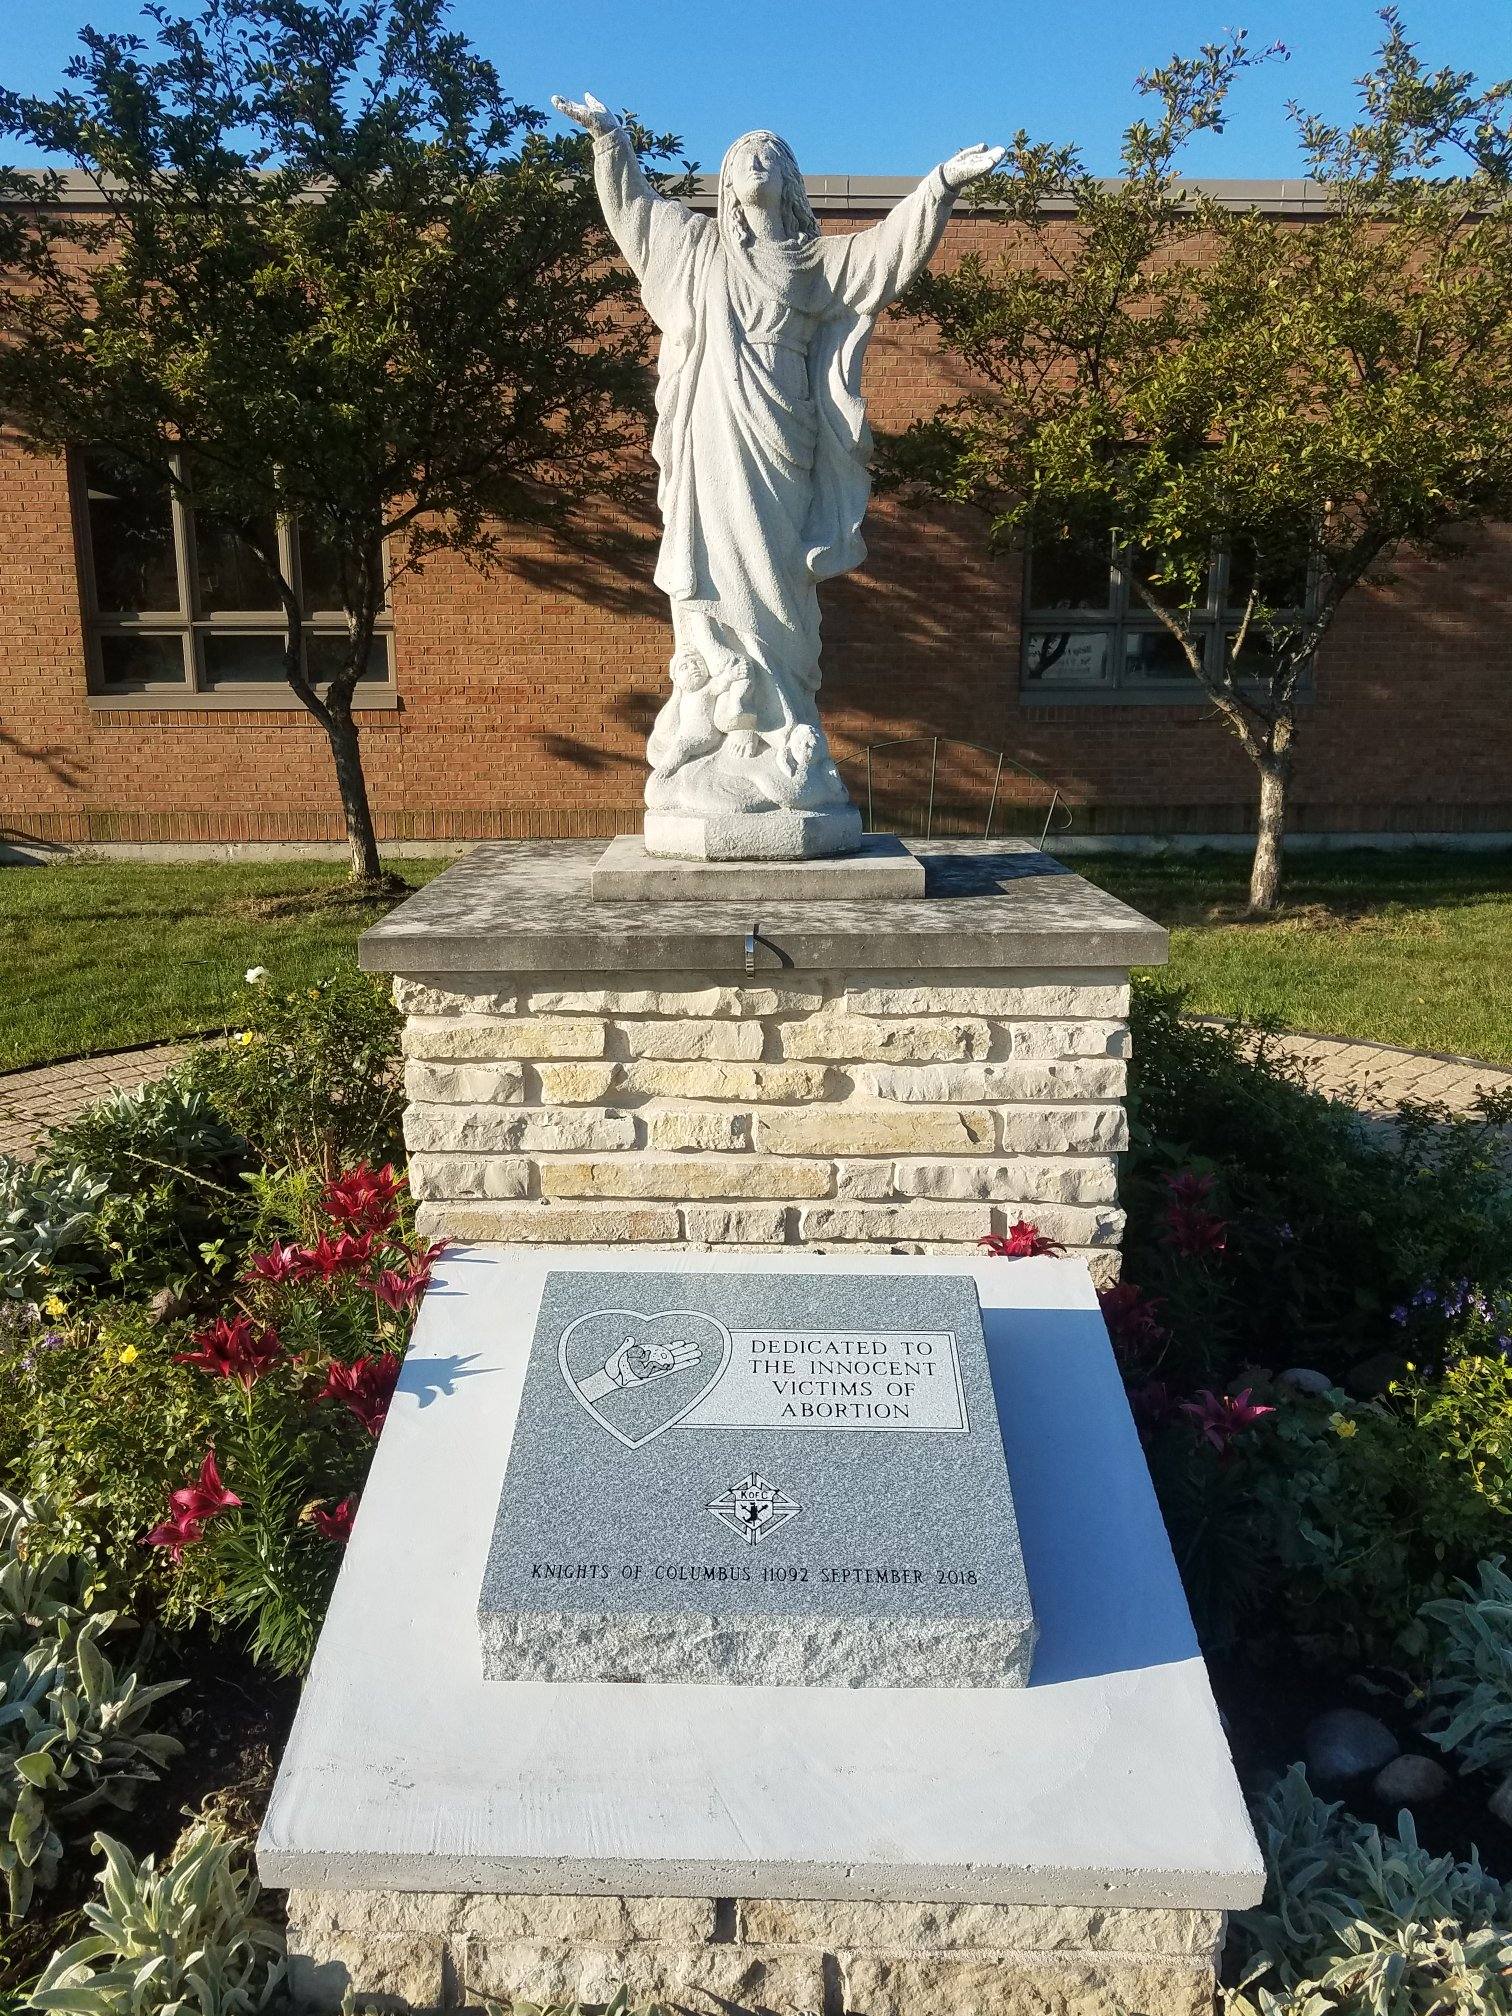 Our Council Dedicates a Memorial to Victims of Abortion